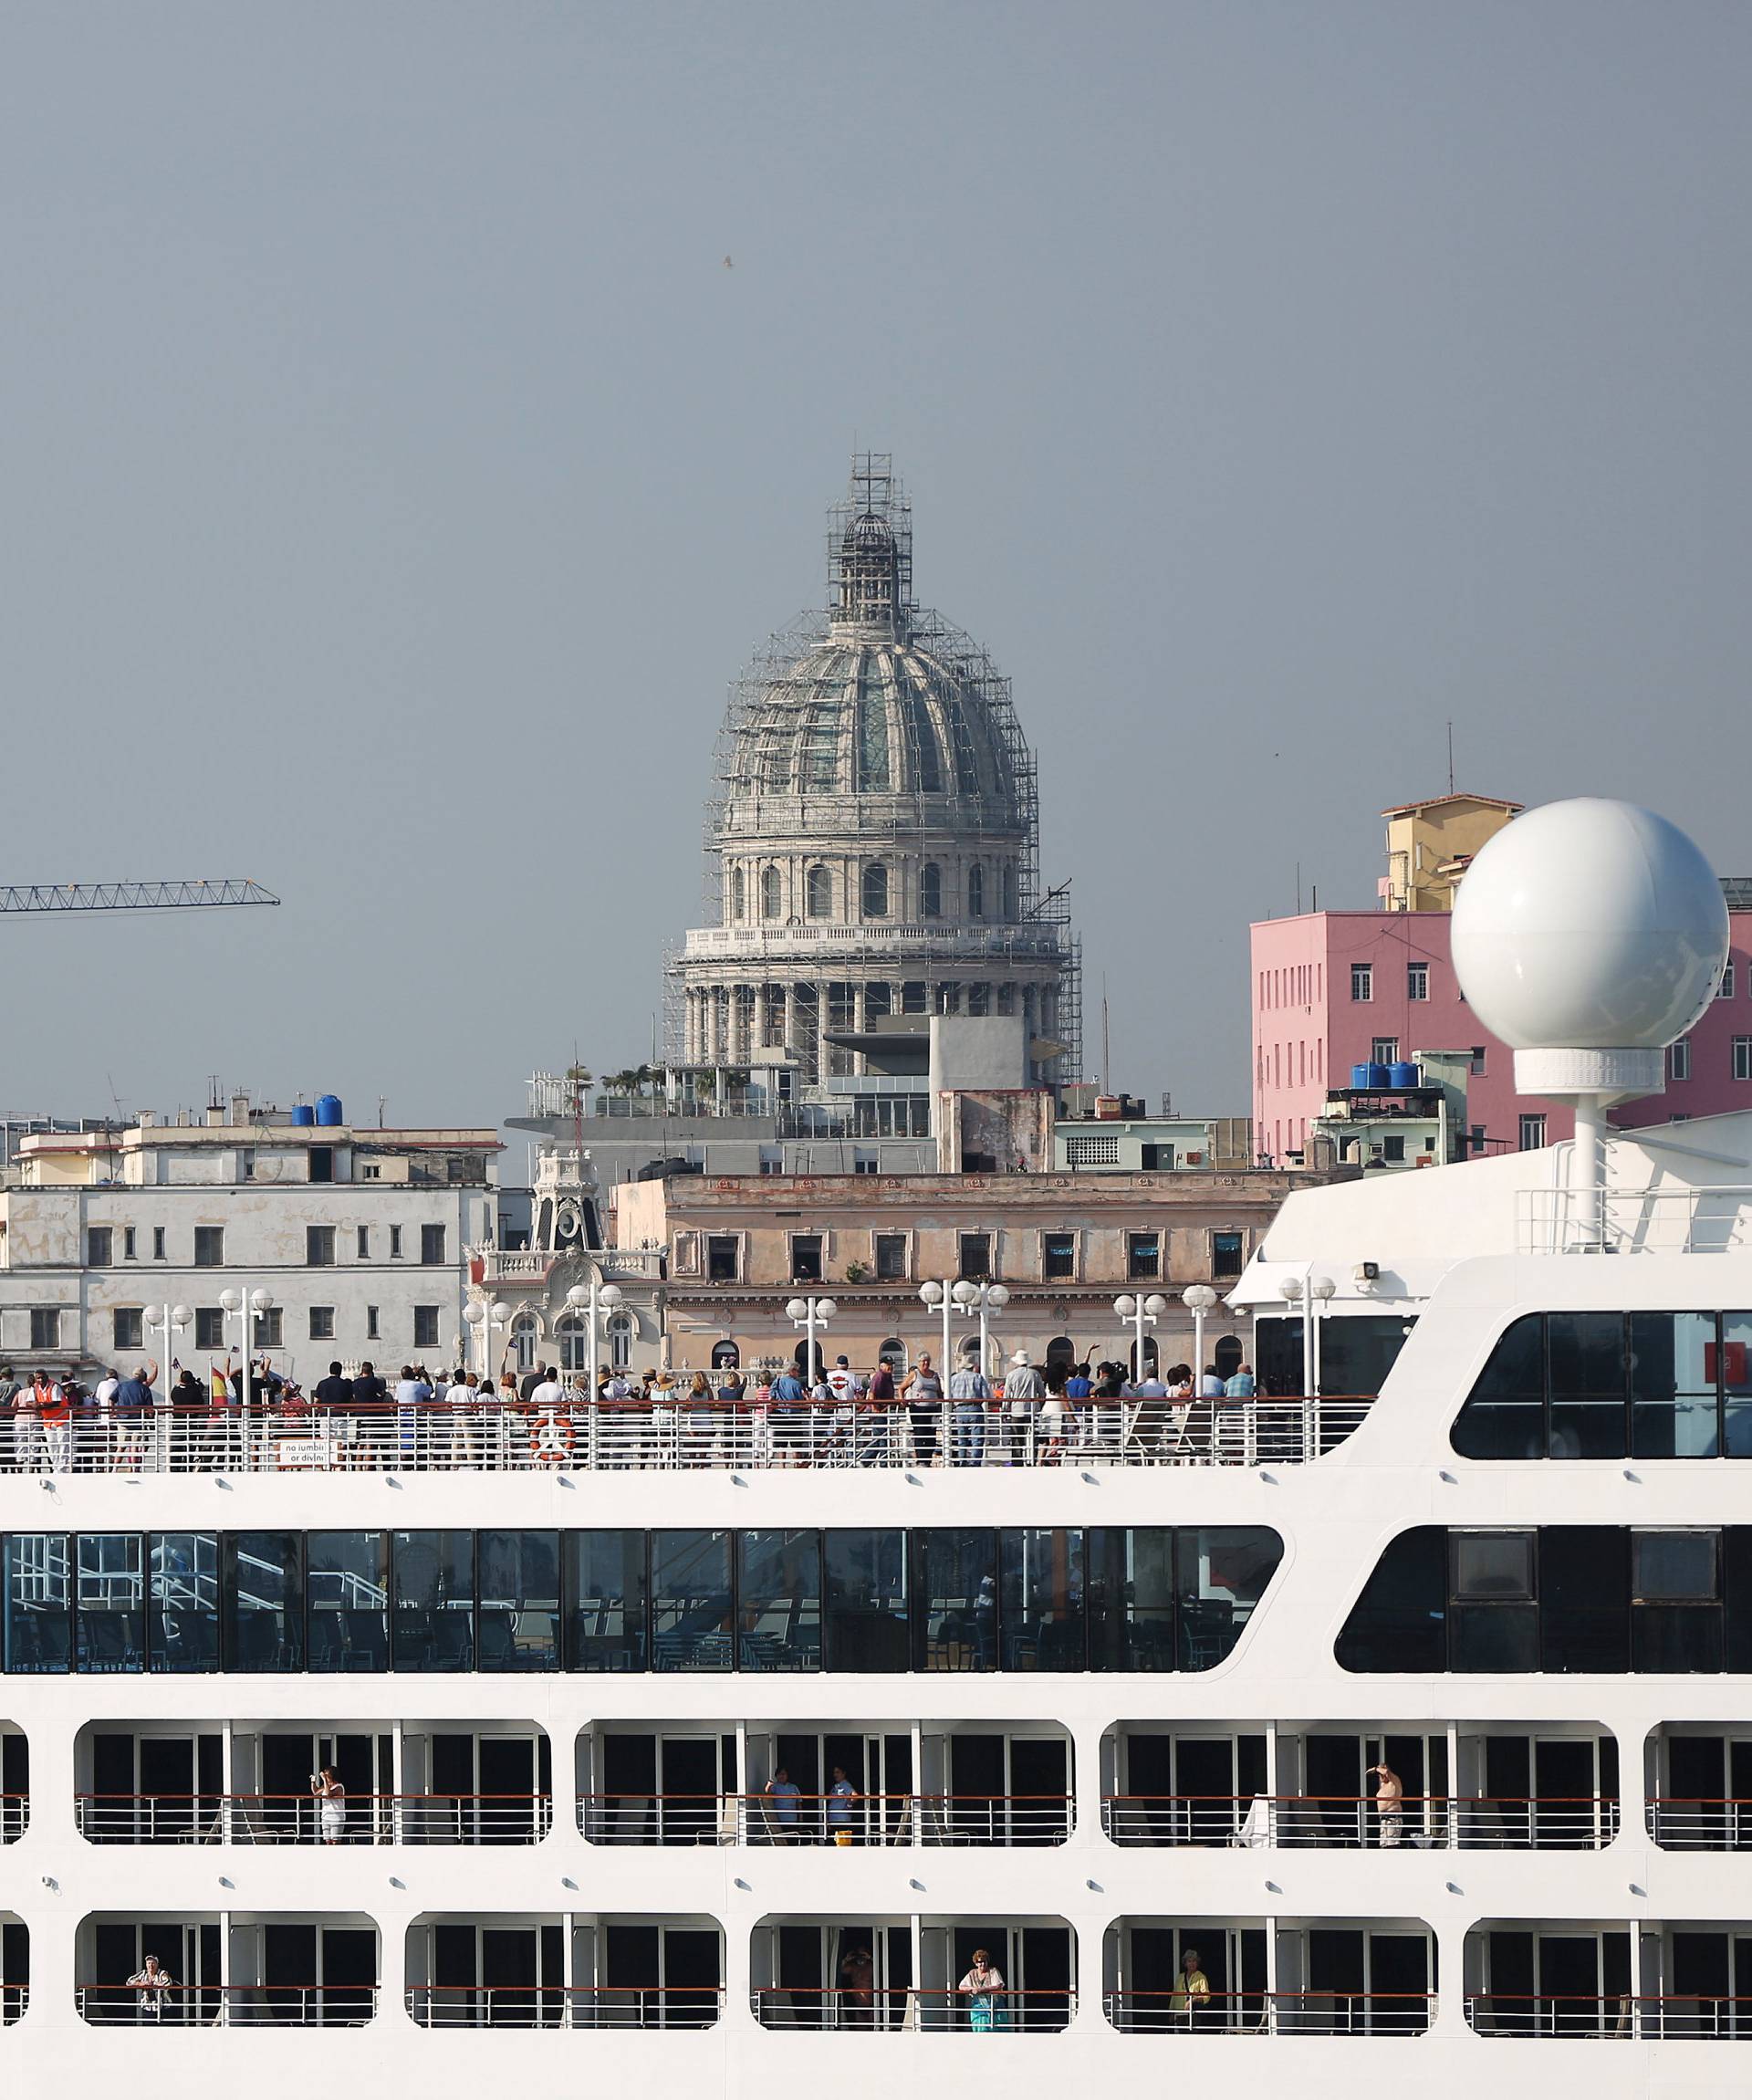 People look at the city of Havana from the deck of U.S. Carnival cruise ship Adonia as it enters at the Havana bay, the first cruise liner to sail between the United States and Cuba since Cuba's 1959 revolution, Cuba